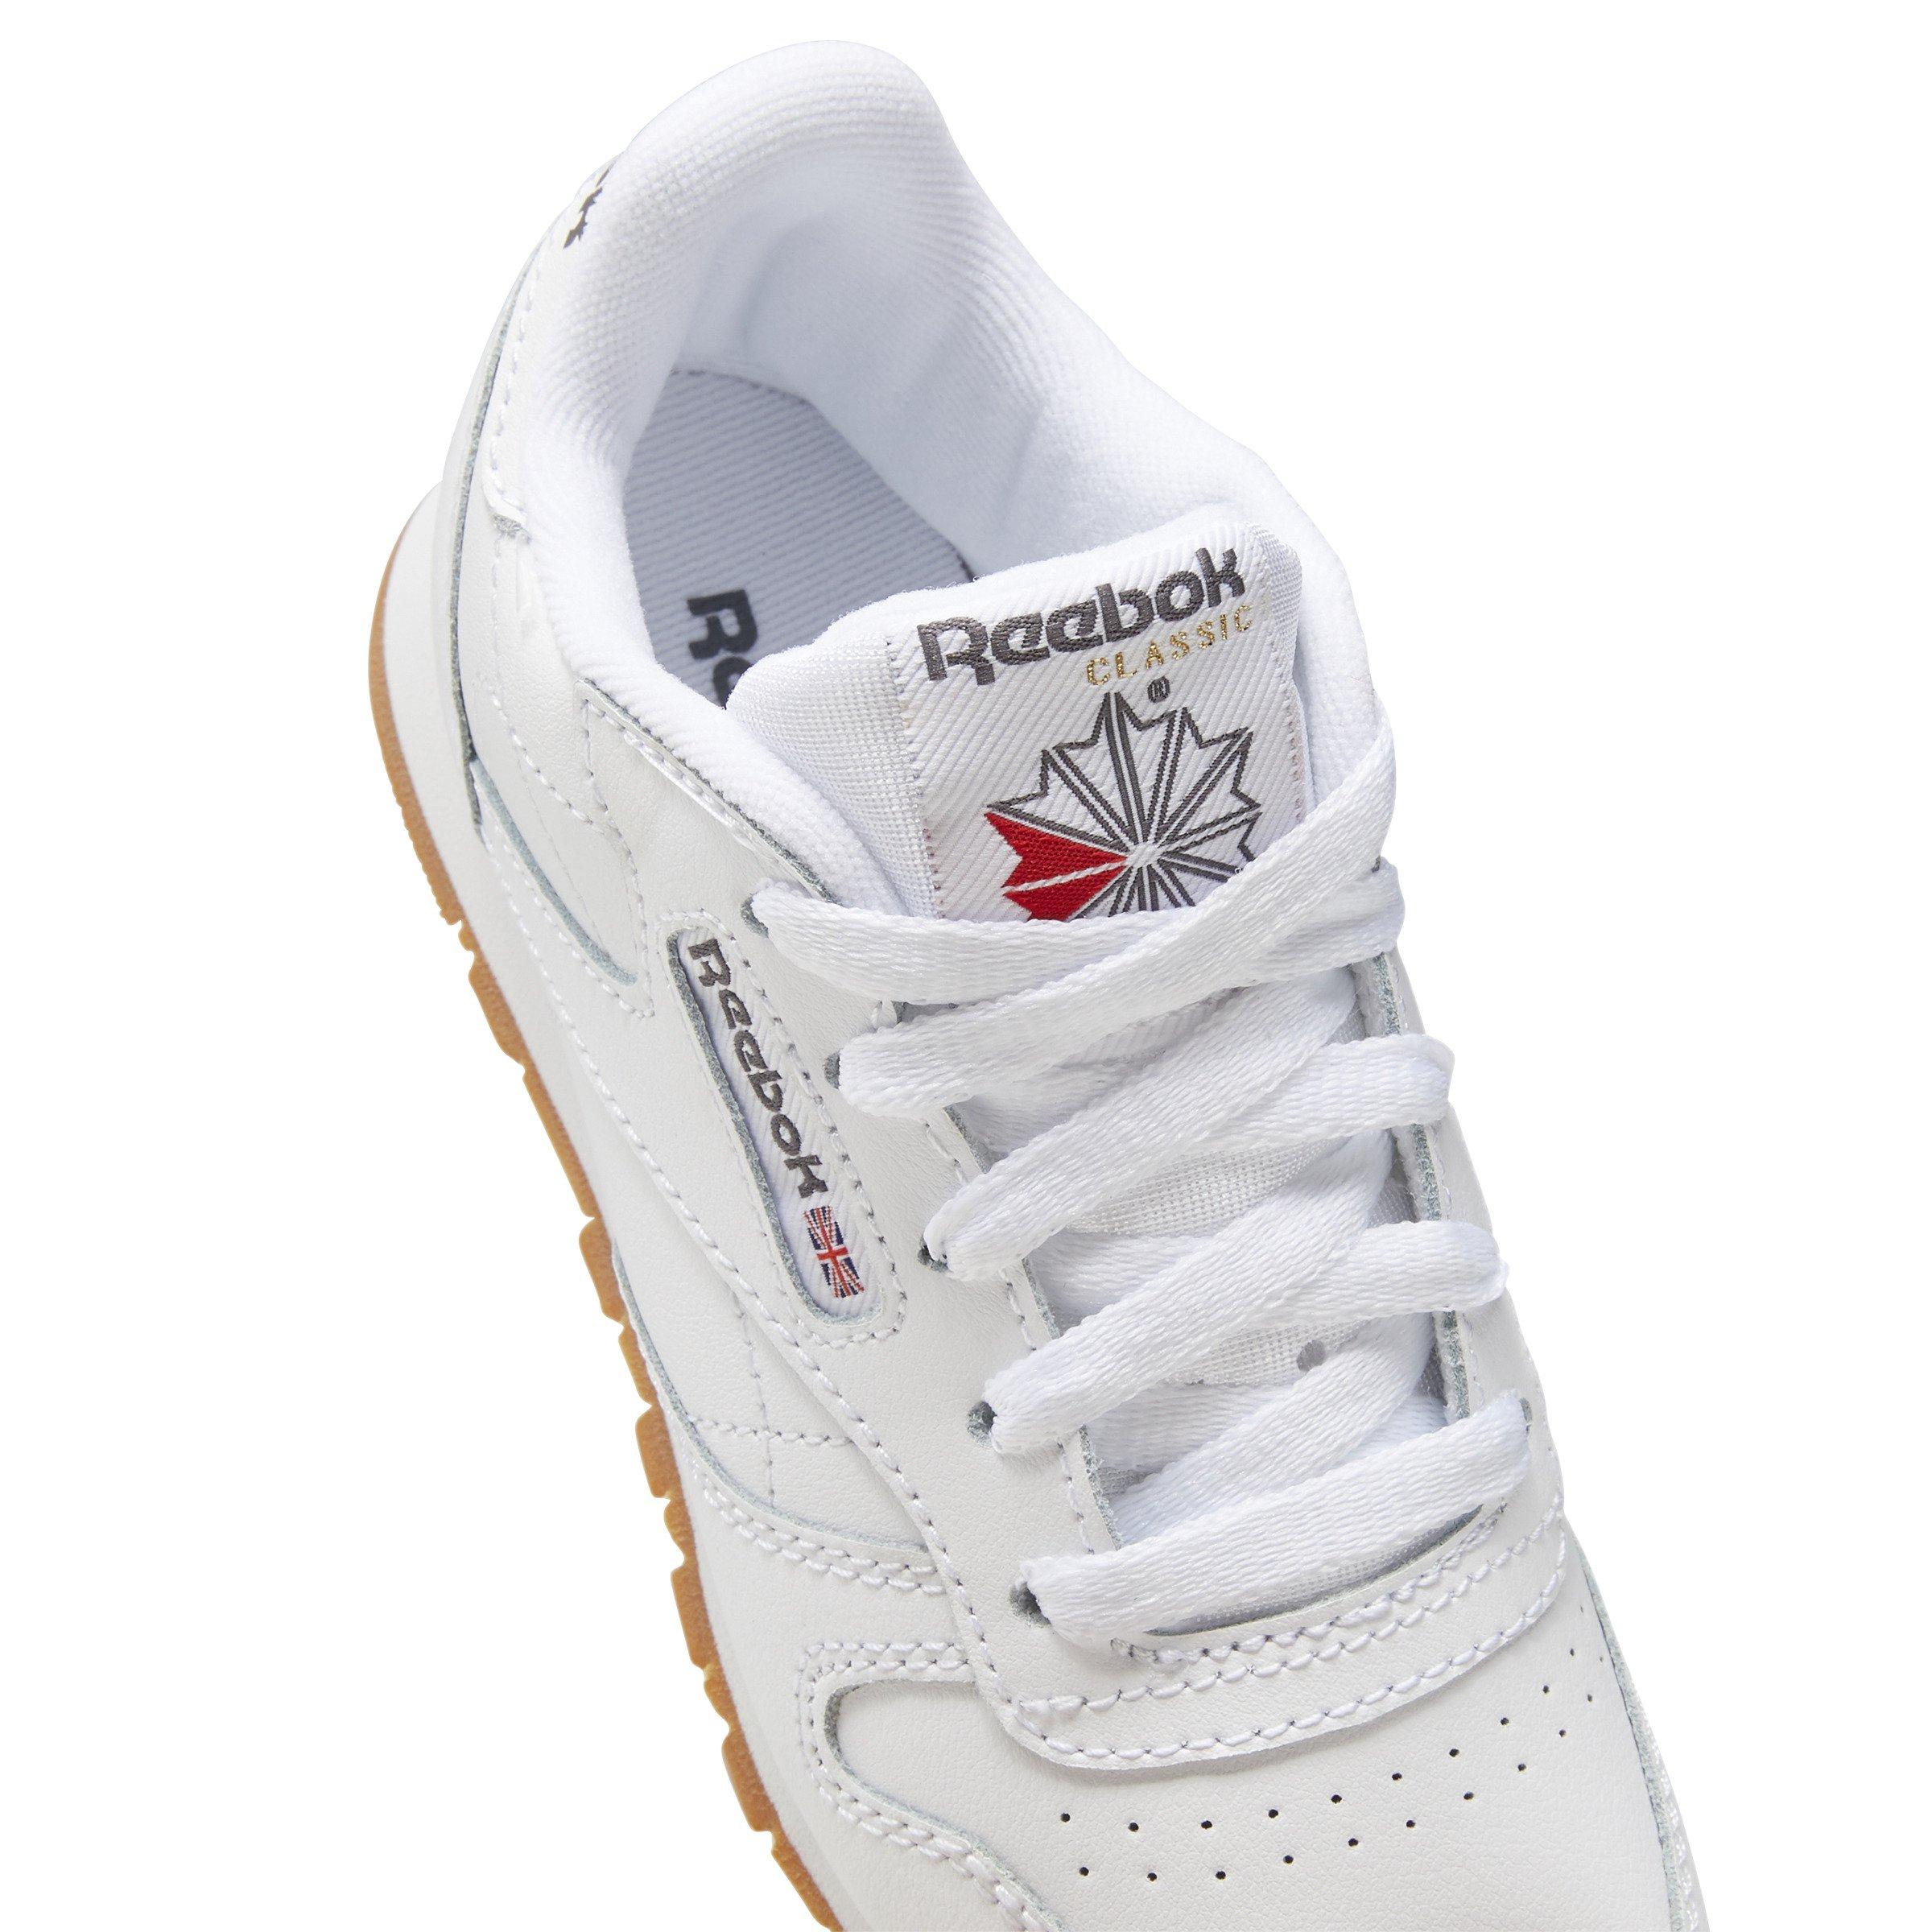 Reebok Classic Leather kid's sneakers shoes size 2.5 Youth white/gum unisex 